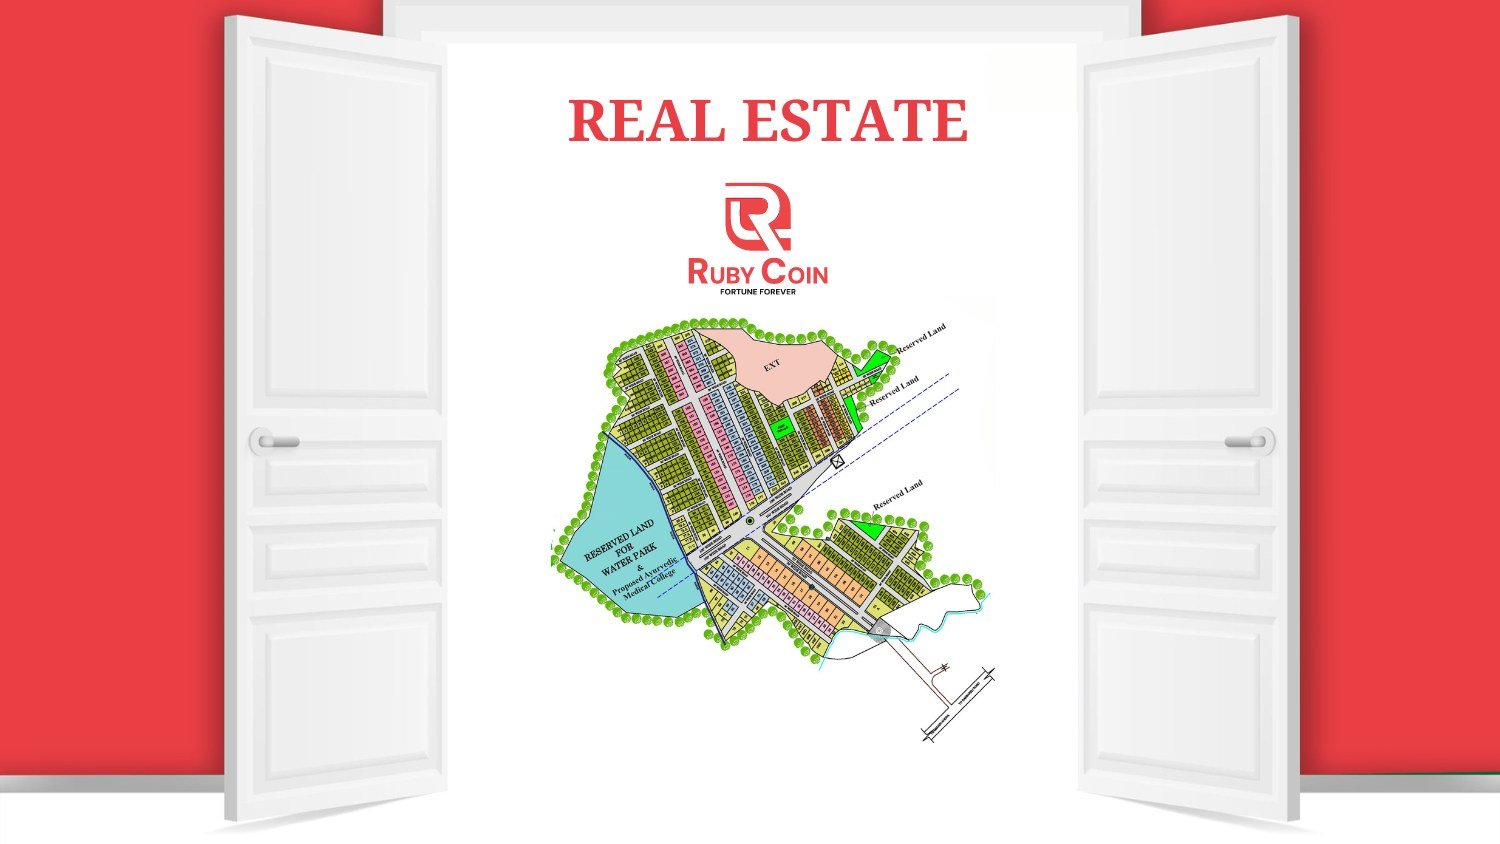 RBC-Real Estate Opportunities with Ruby Coins Elite Club